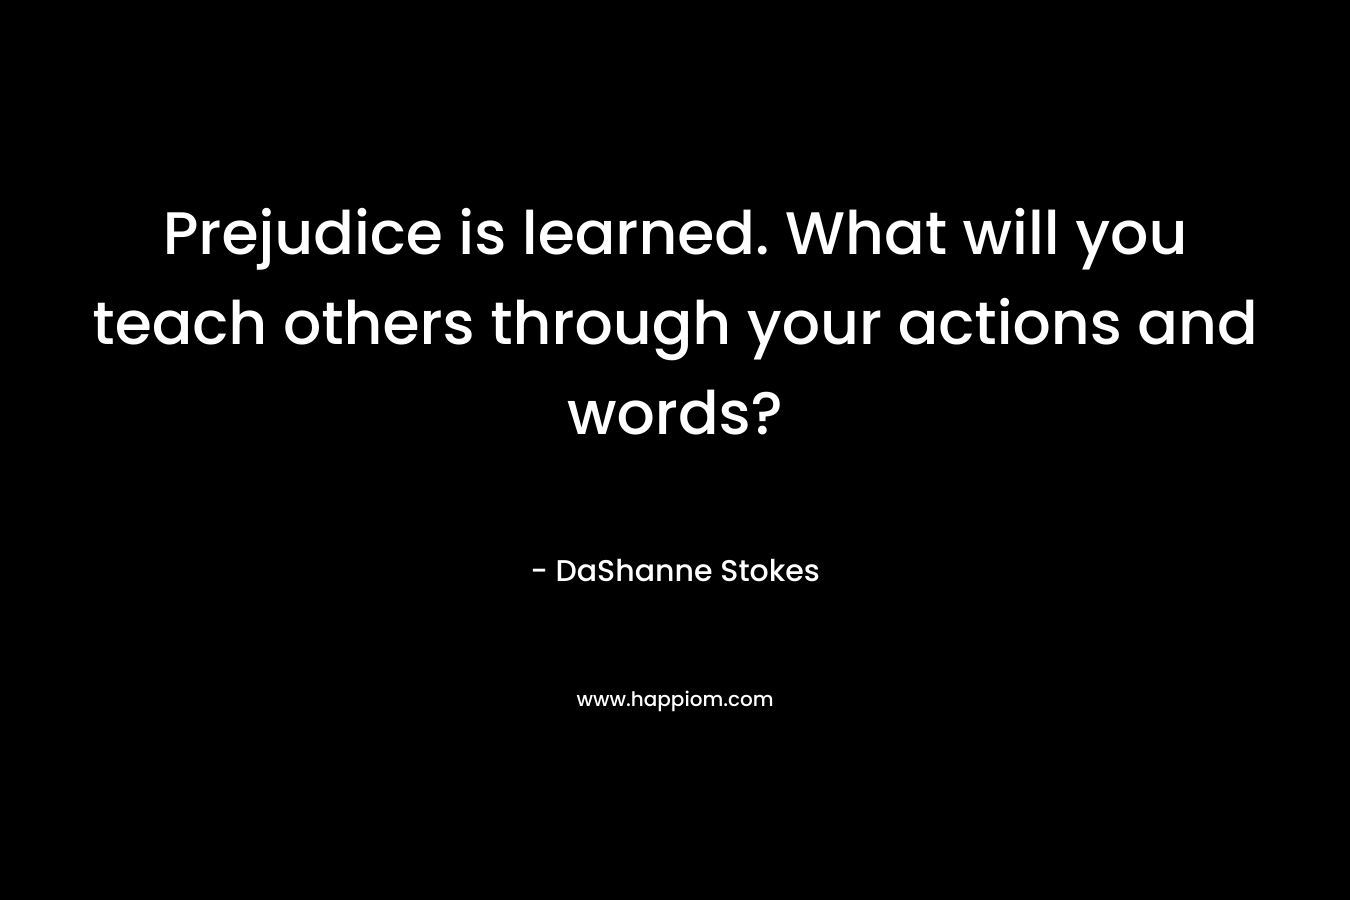 Prejudice is learned. What will you teach others through your actions and words?